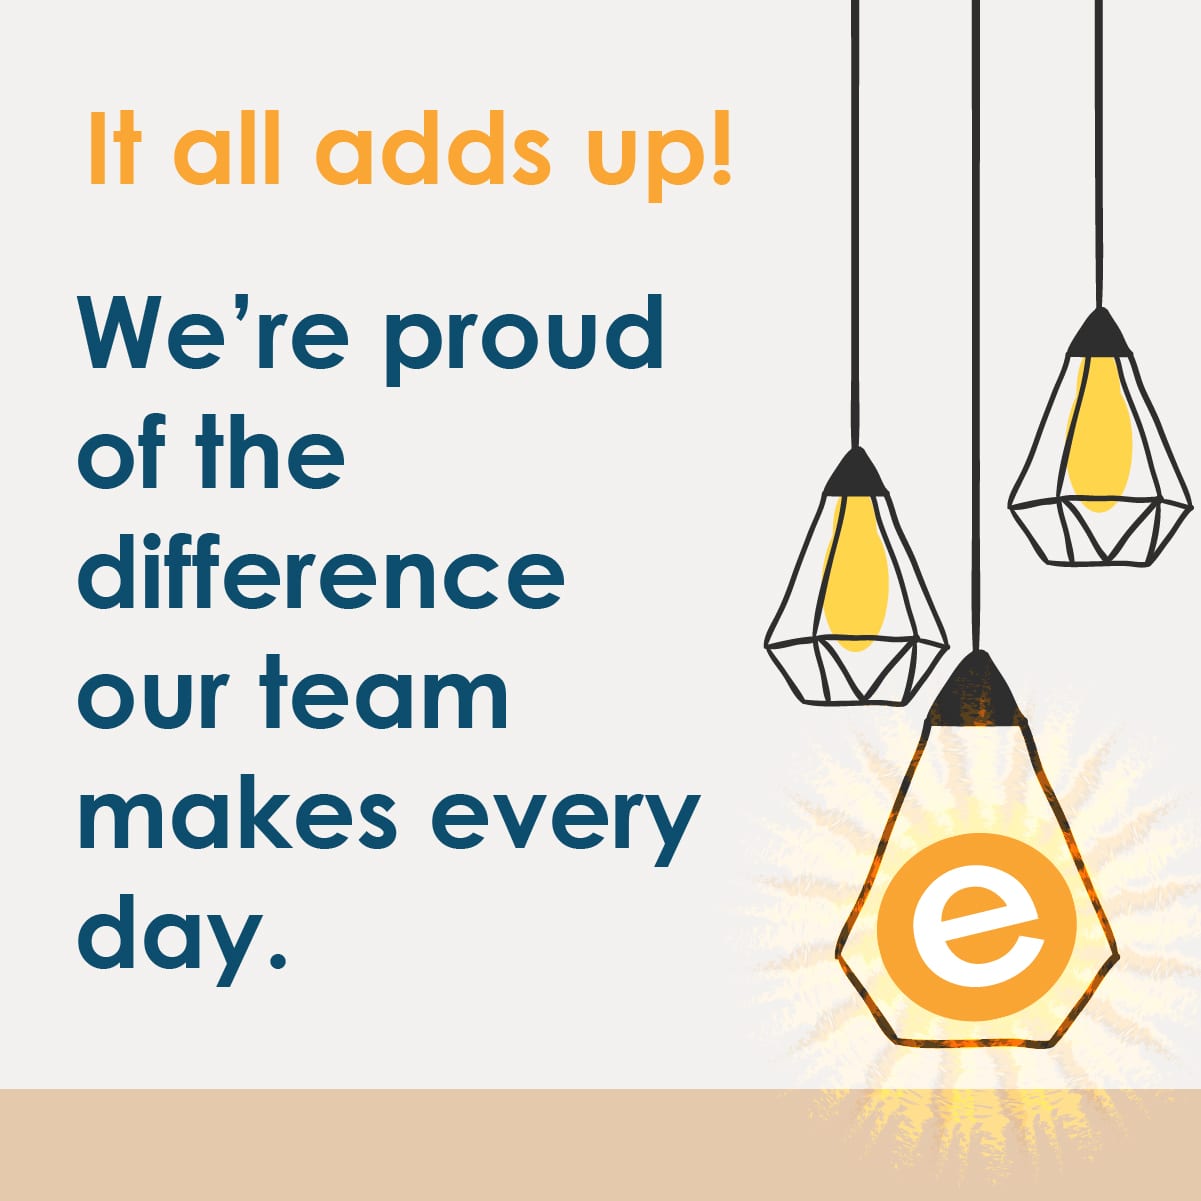 We're proud of the difference the EnergyLogic team makes every day.